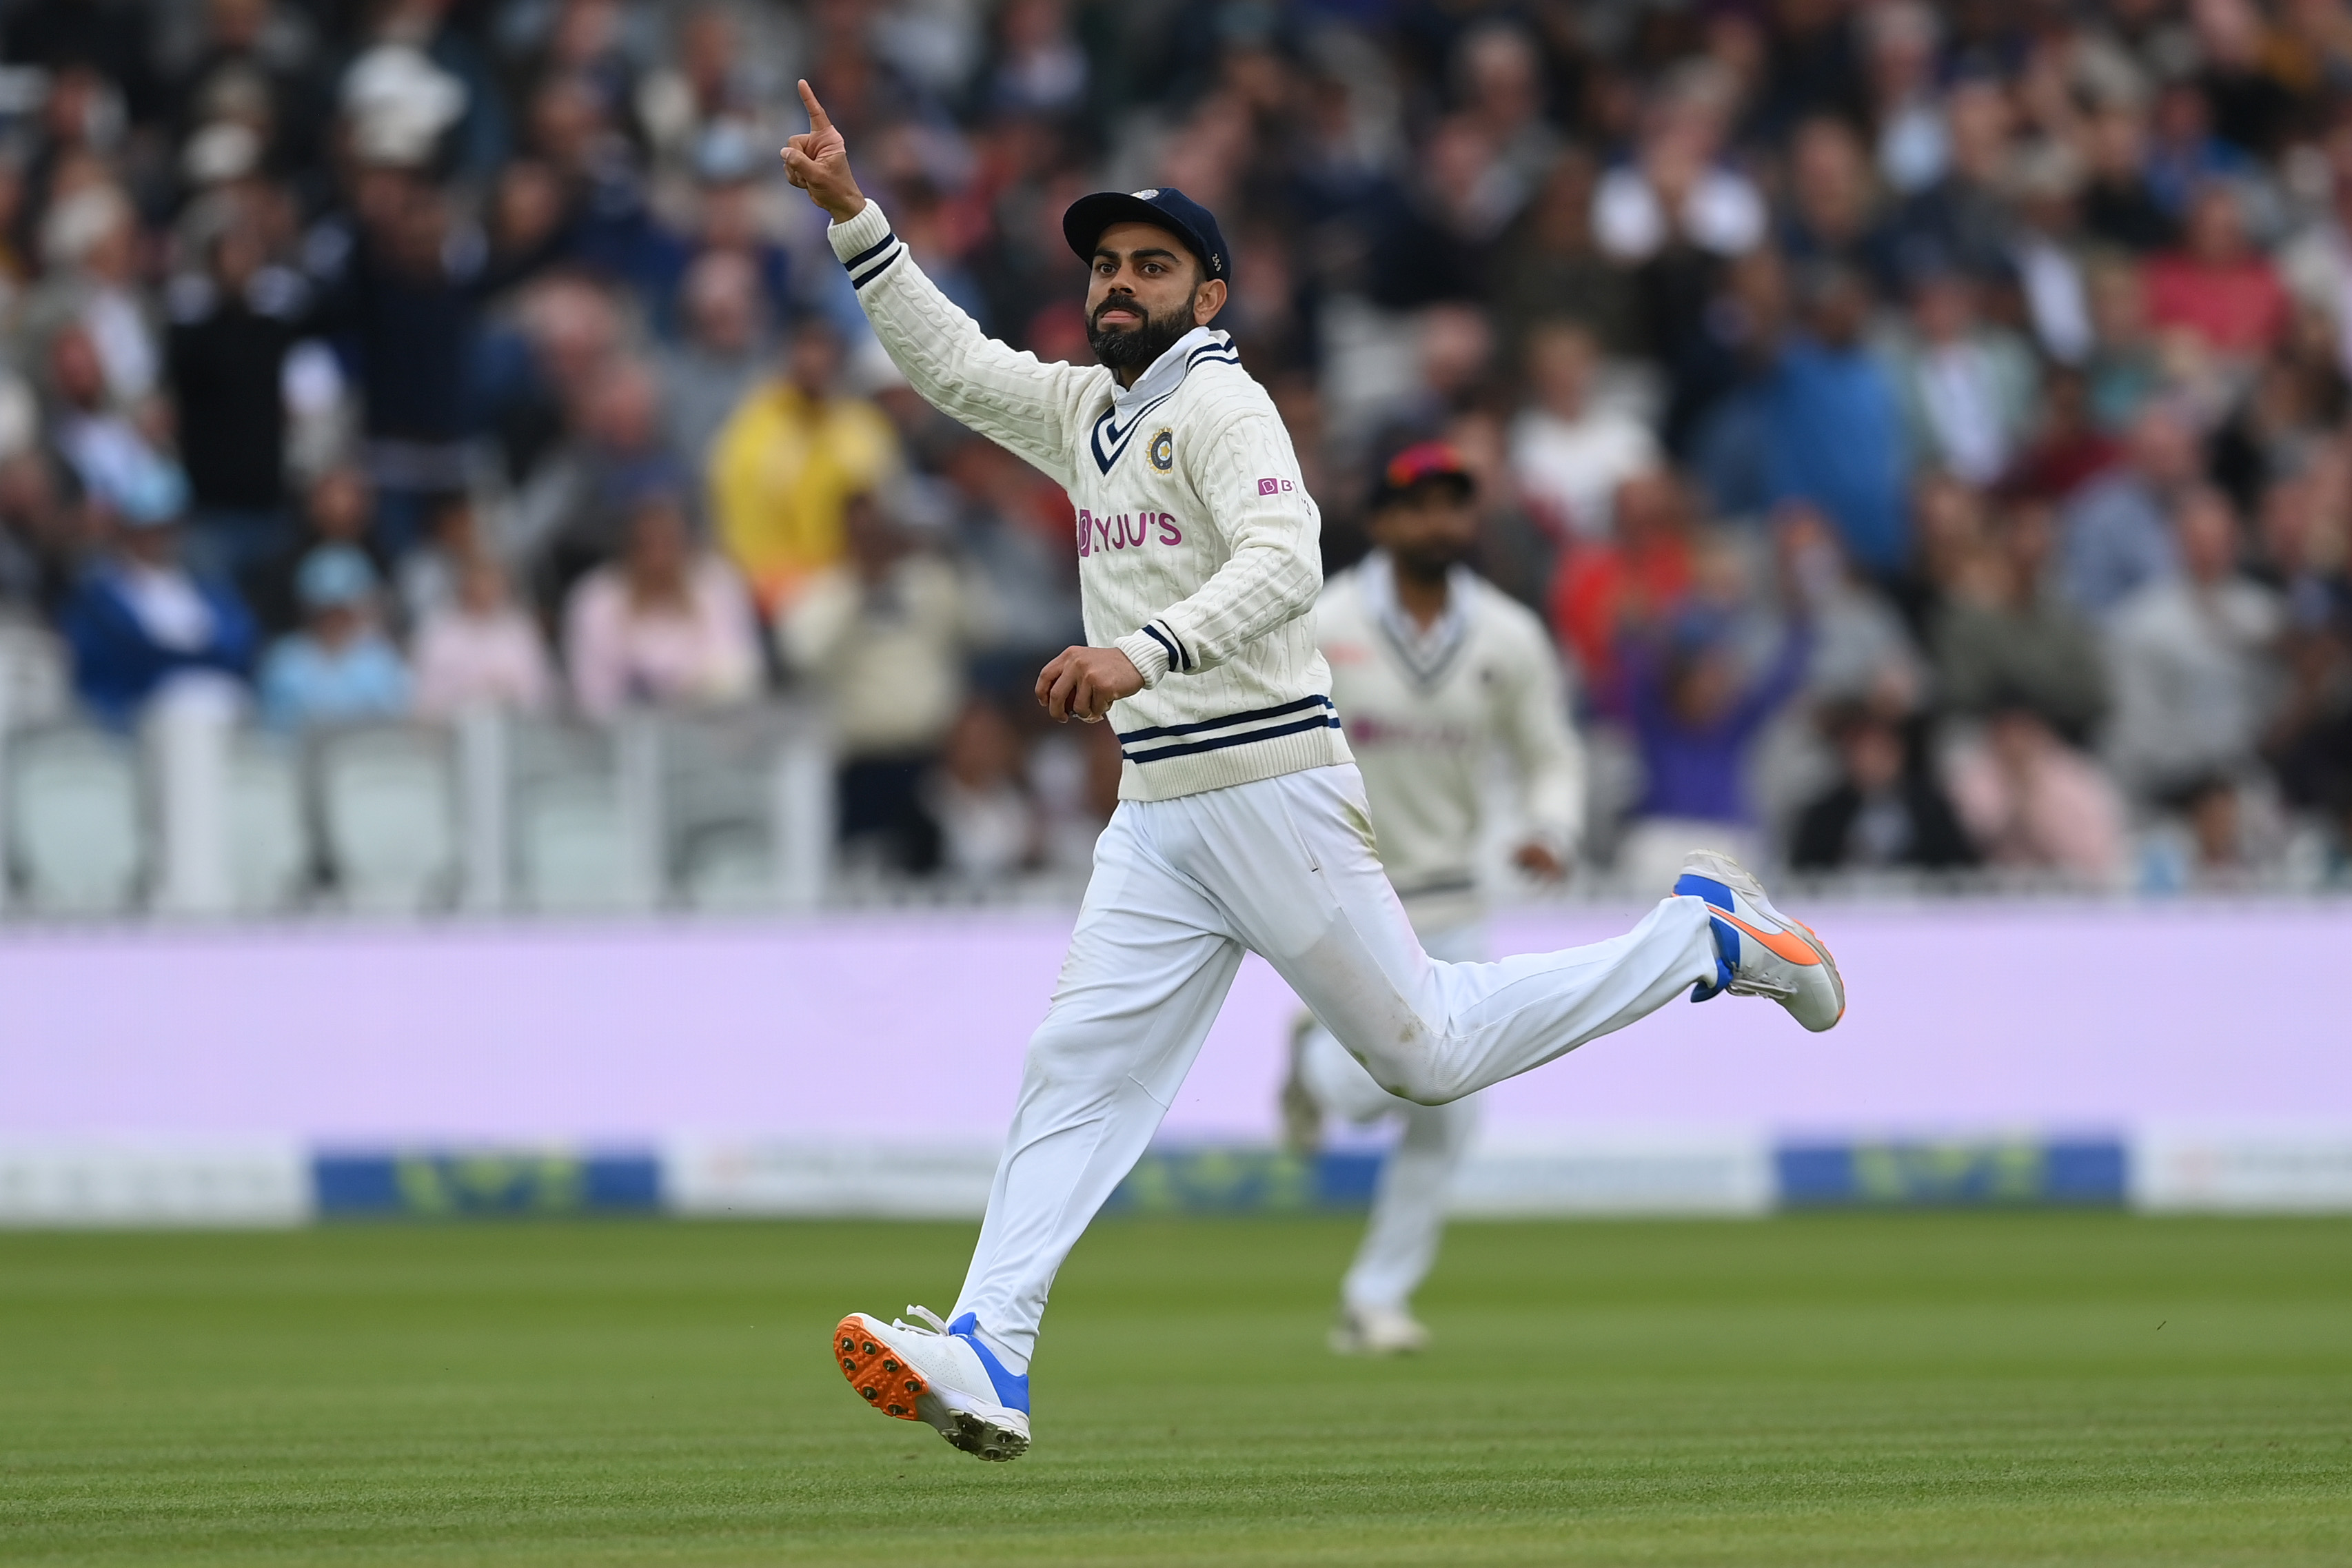 Kohli gets very abusive and needs to realize that he's an inspiration to youngsters, slams Nick Compton